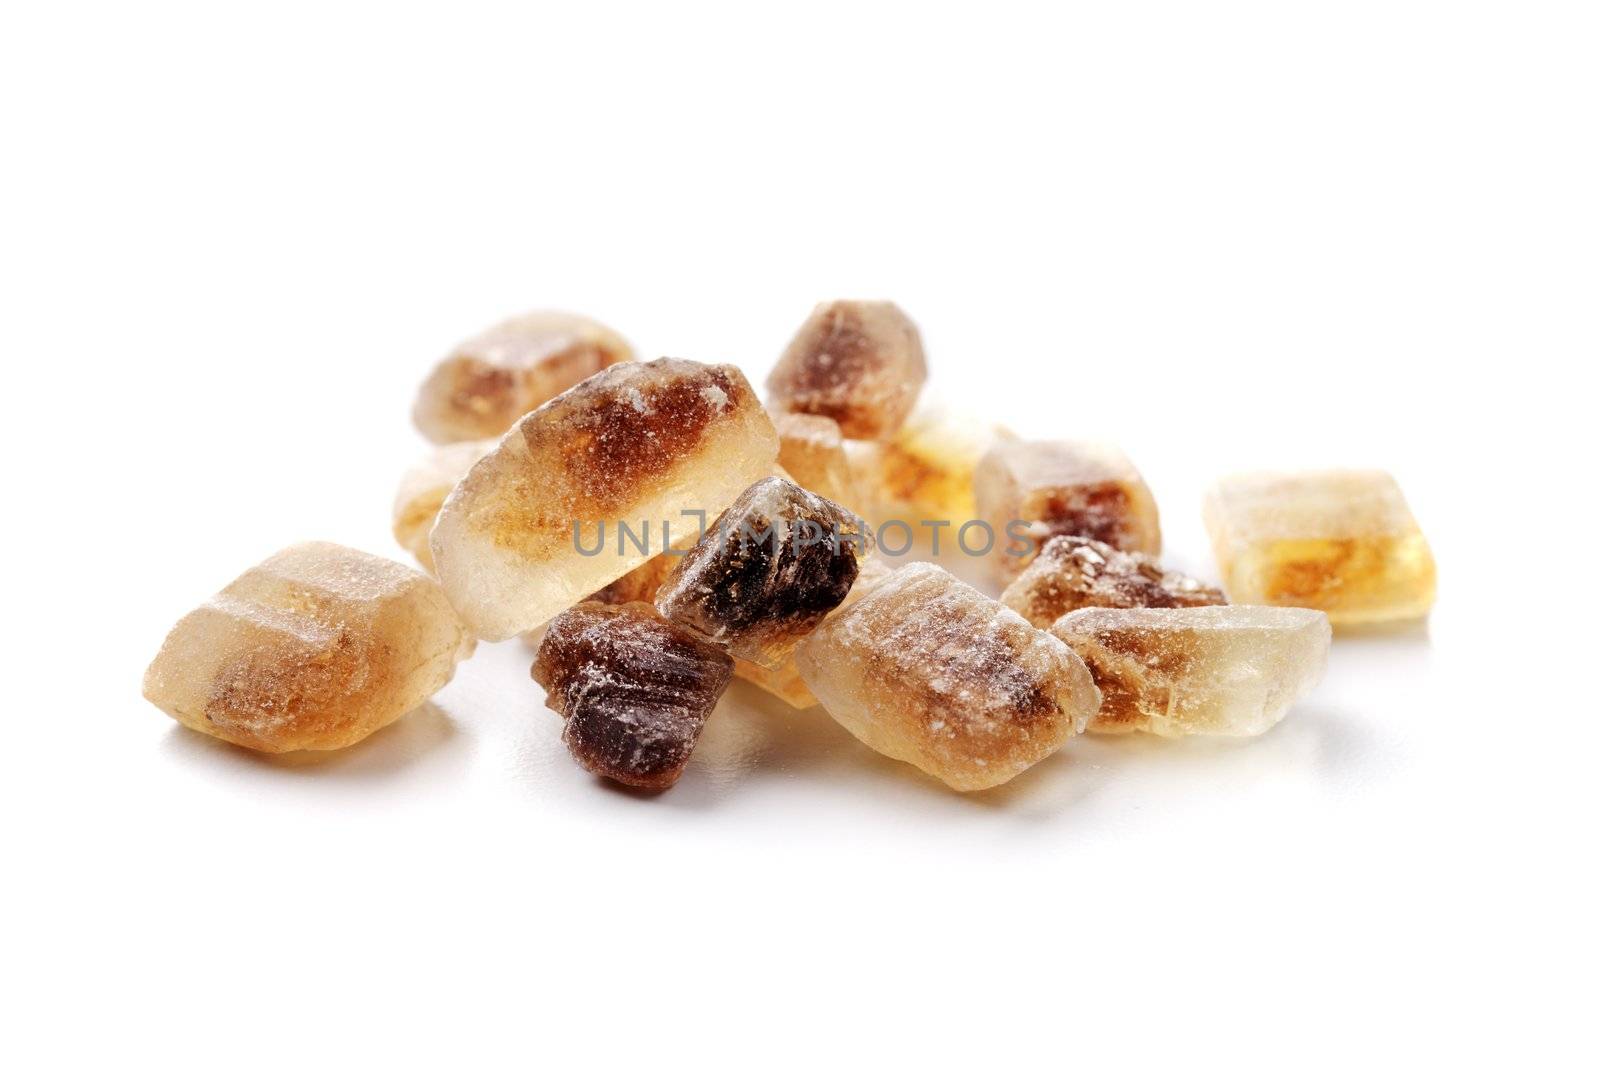 Crystals of Candi sugar / Rock sugar isolated on white with natural shadows.